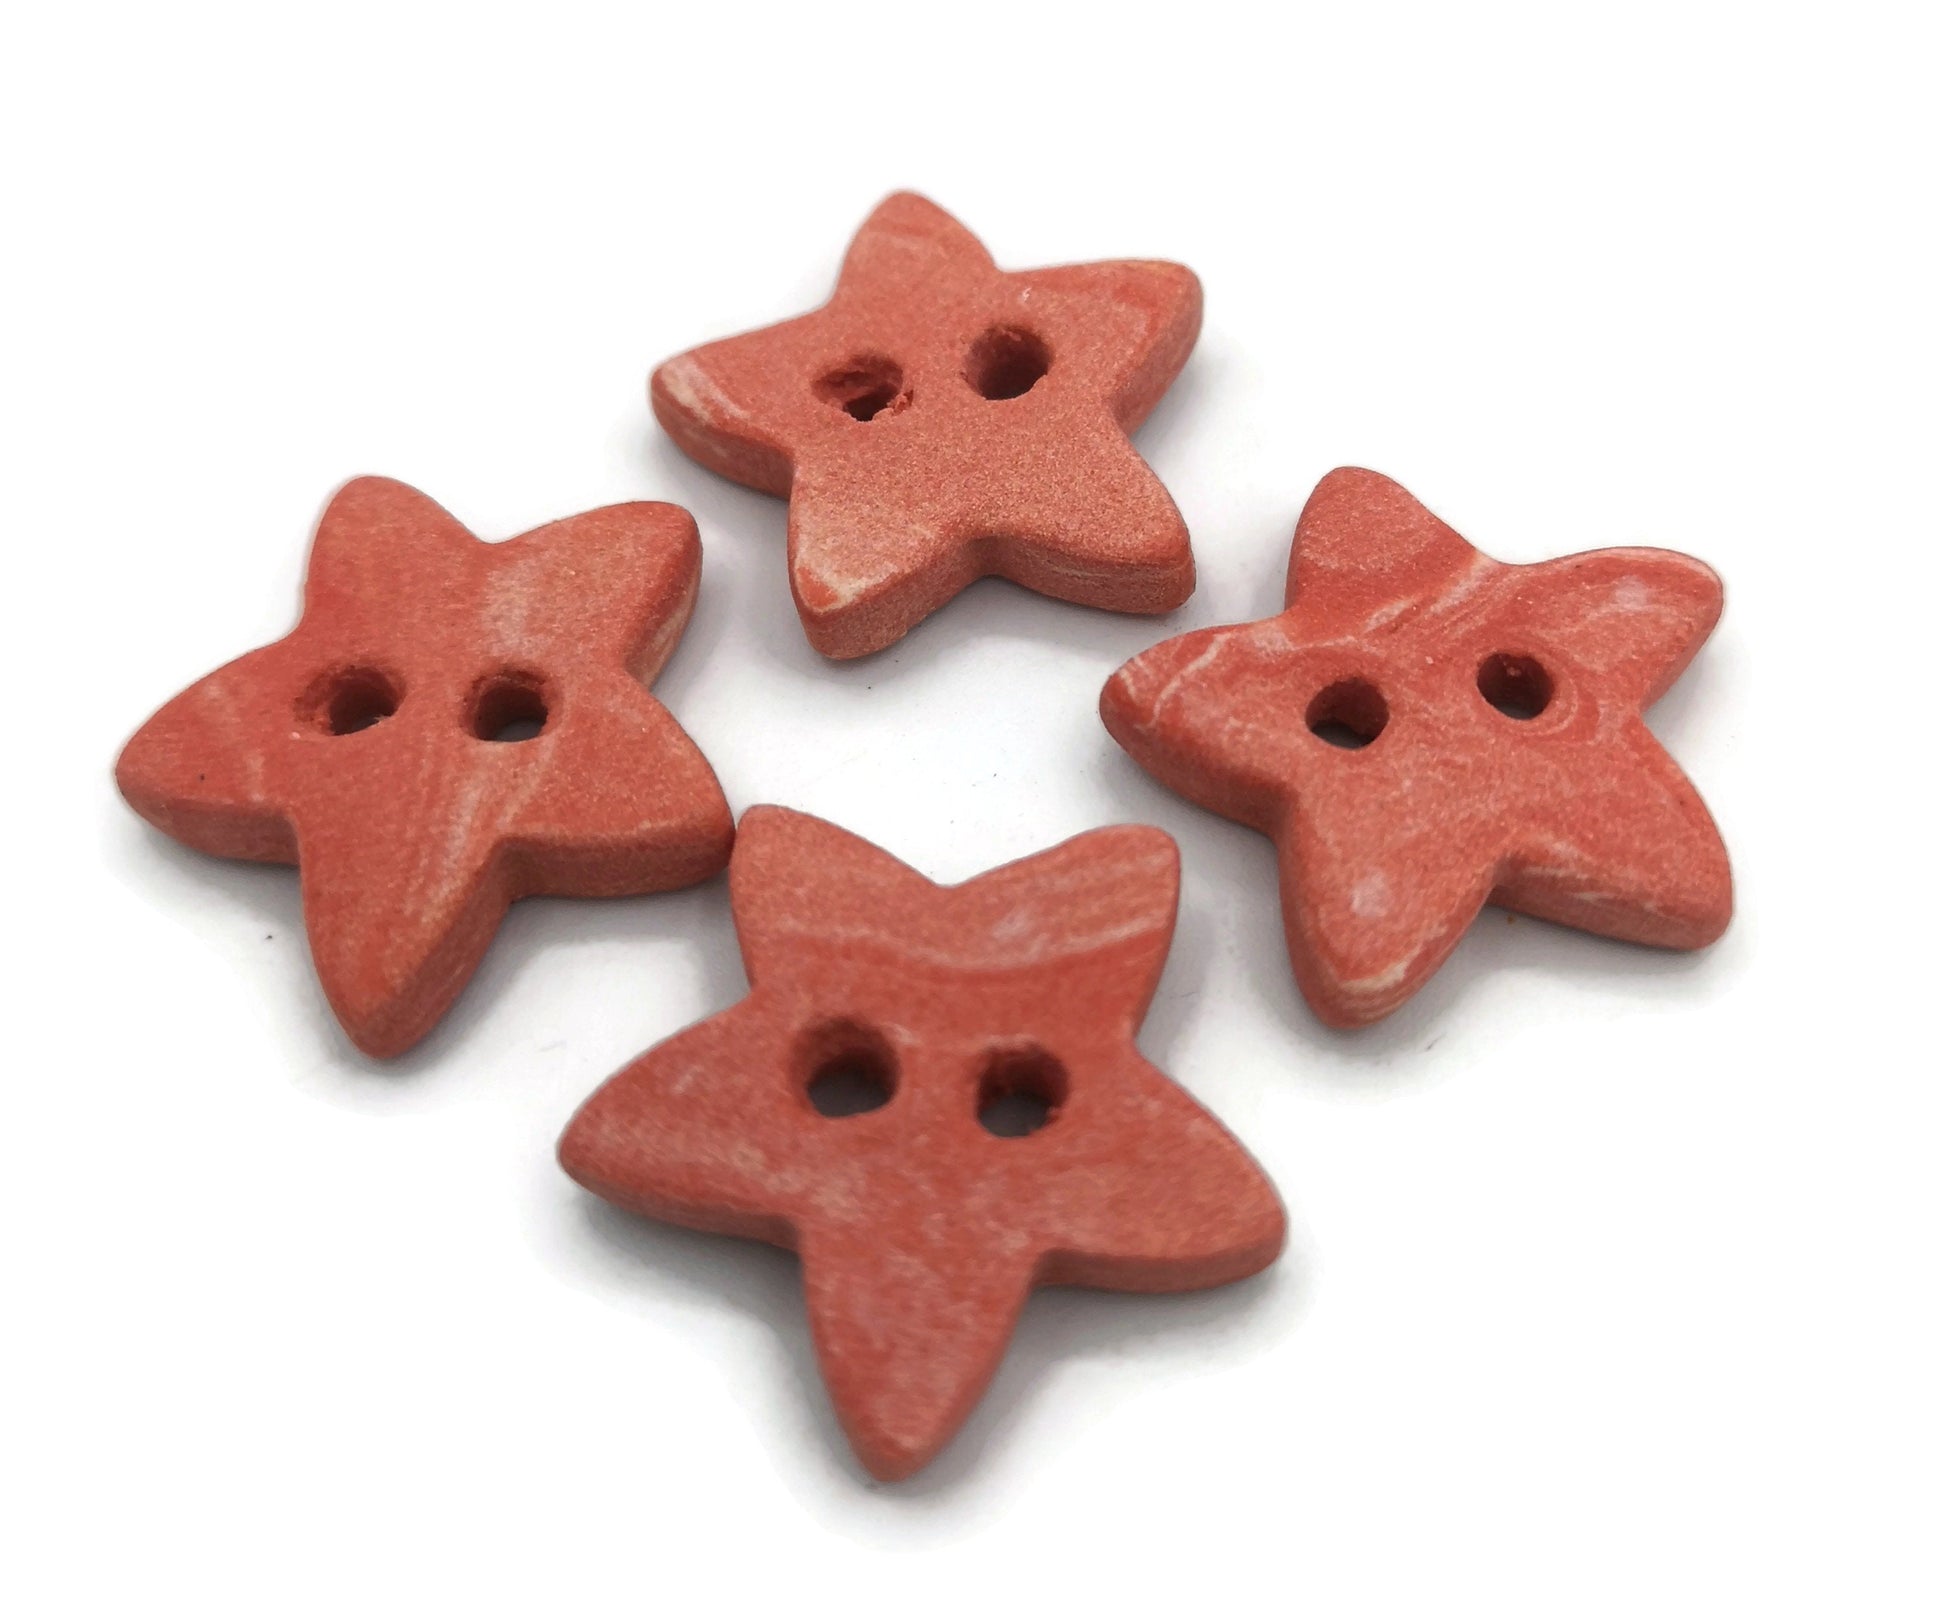 4 Decorative Star Sewing Buttons For Jewelry Making, Cute Kawaii Buttons For Blouse Coat Or Jacket, Best Sellers Sewing supplies And Notions - Ceramica Ana Rafael